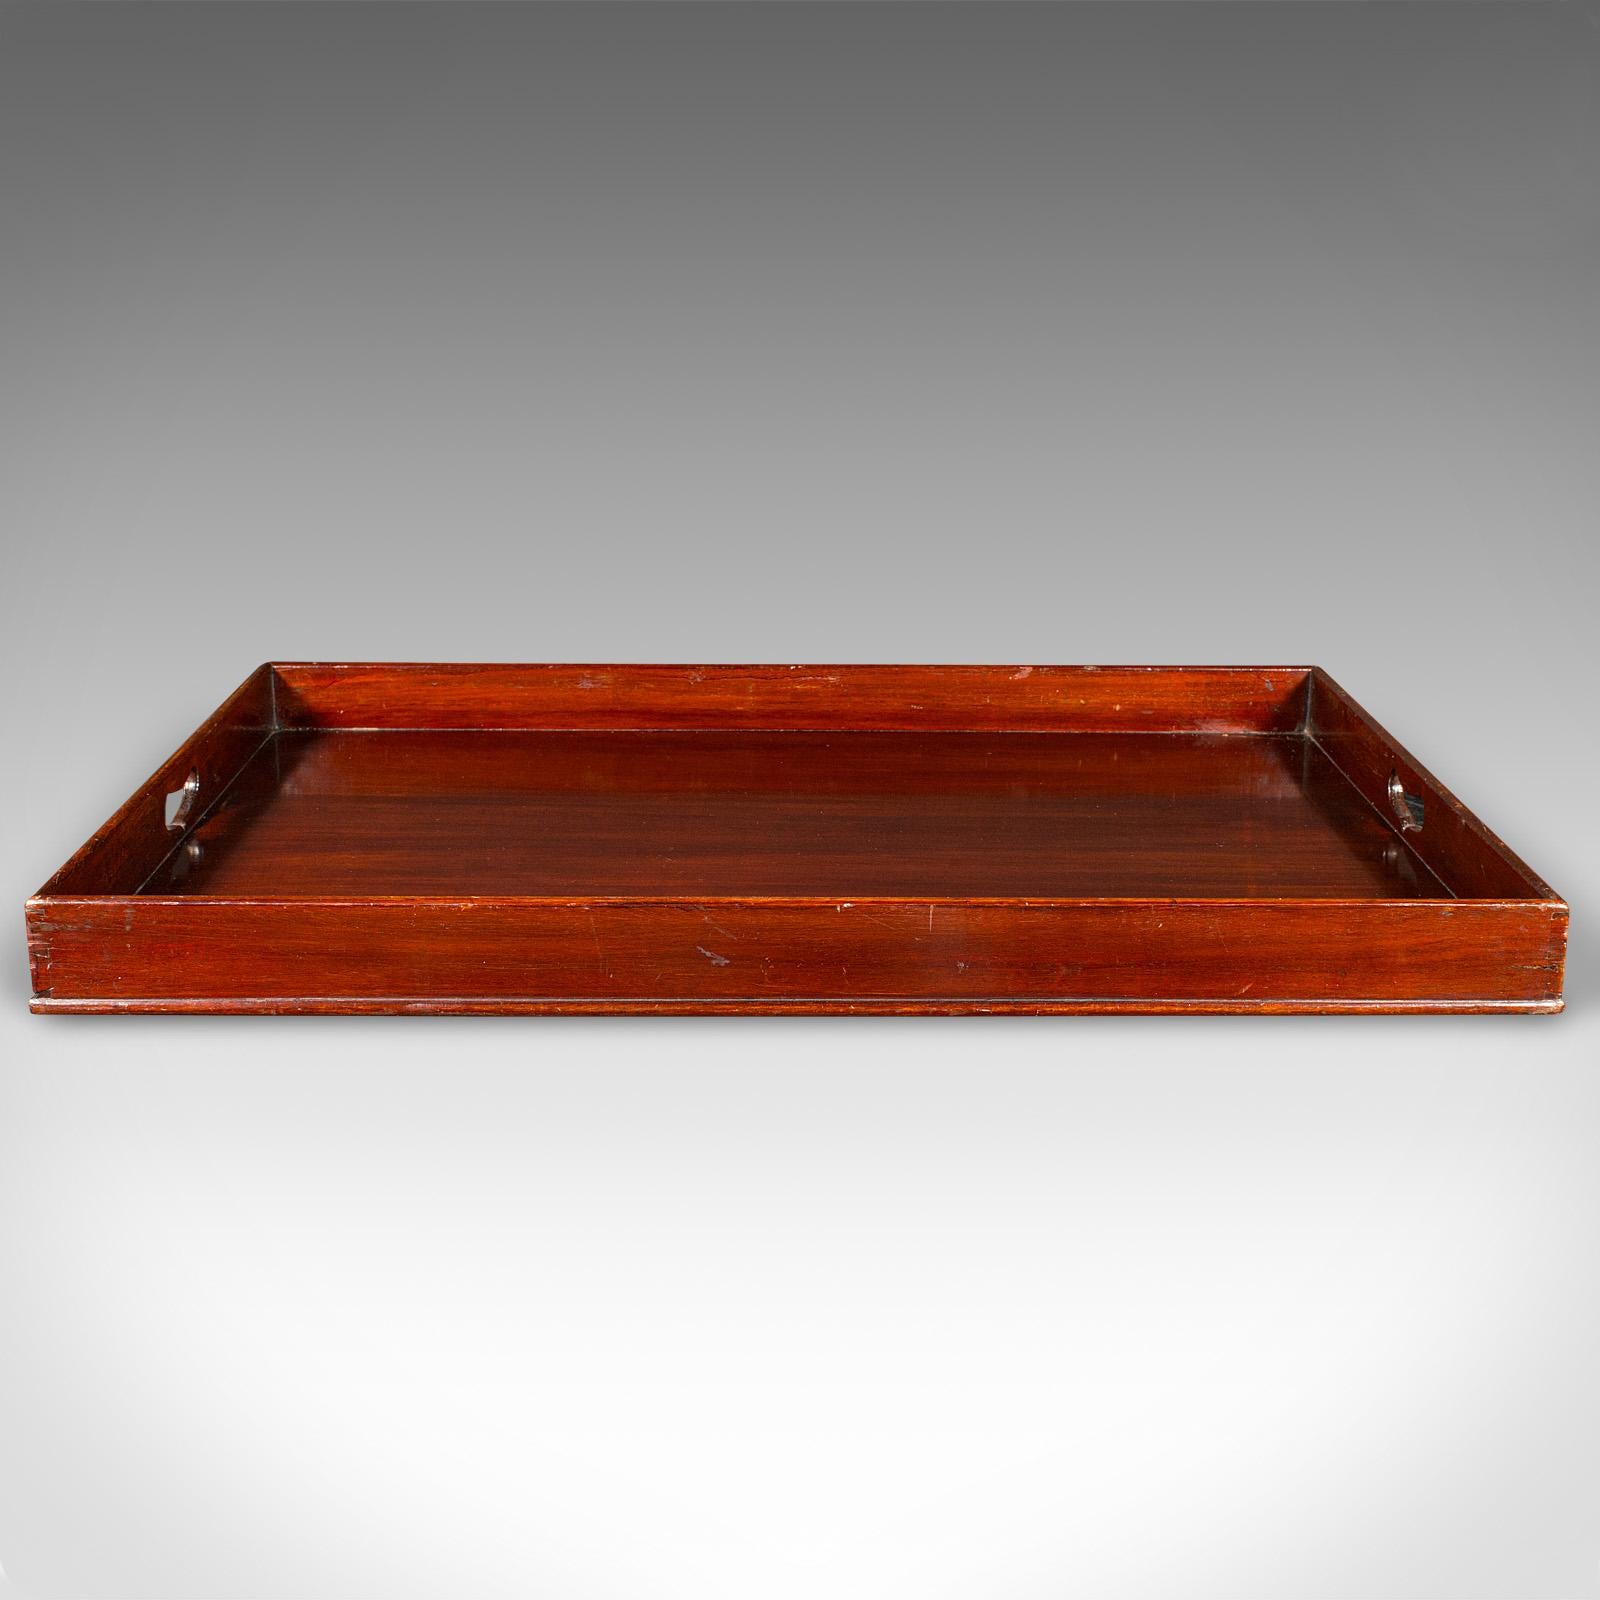 This is a large antique butler's tray. An English, walnut afternoon tea valet, dating to the Georgian period, circa 1800.

Great proportion with superb stocks and rich colour
Displays a desirable aged patina and in good order
Stout walnut stocks